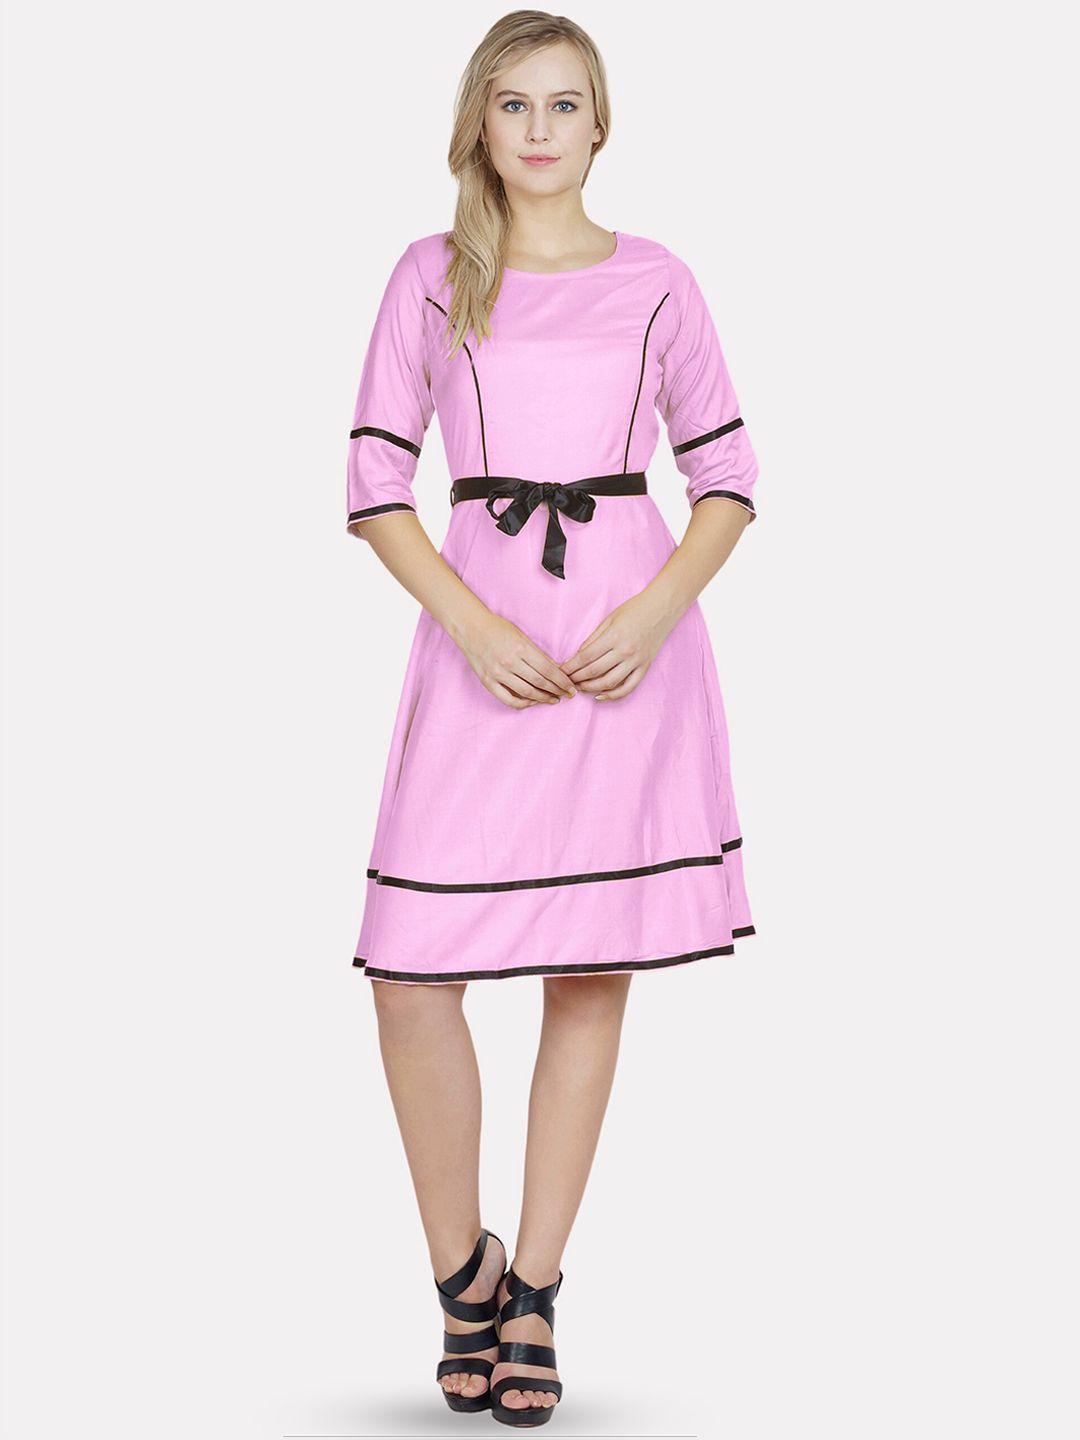 patrorna round neck regular sleeves cotton casual fit & flare dress